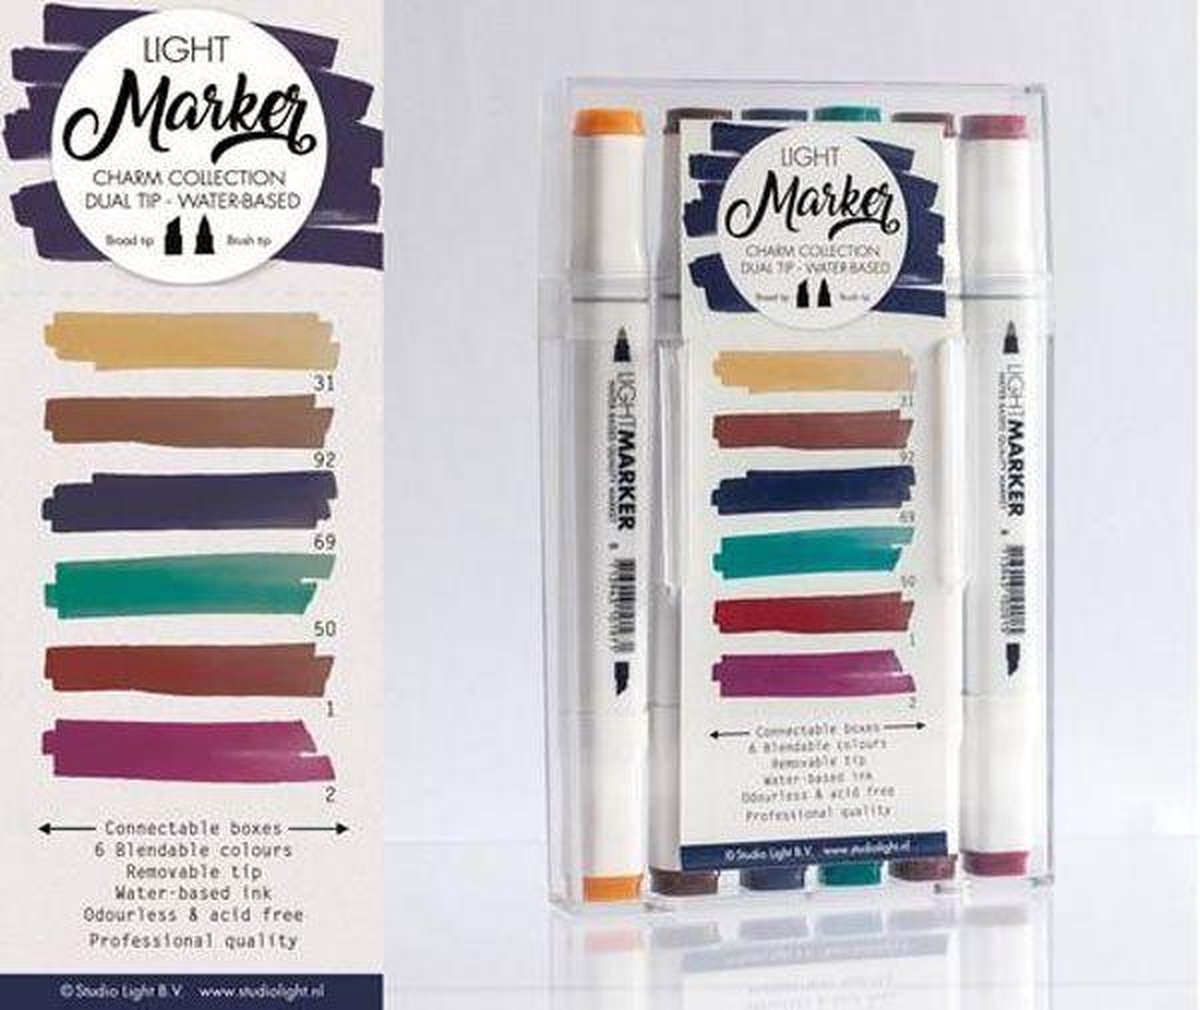 Afbeelding van product Studio Light  Charm - Box 6 water based dual tip markers bright